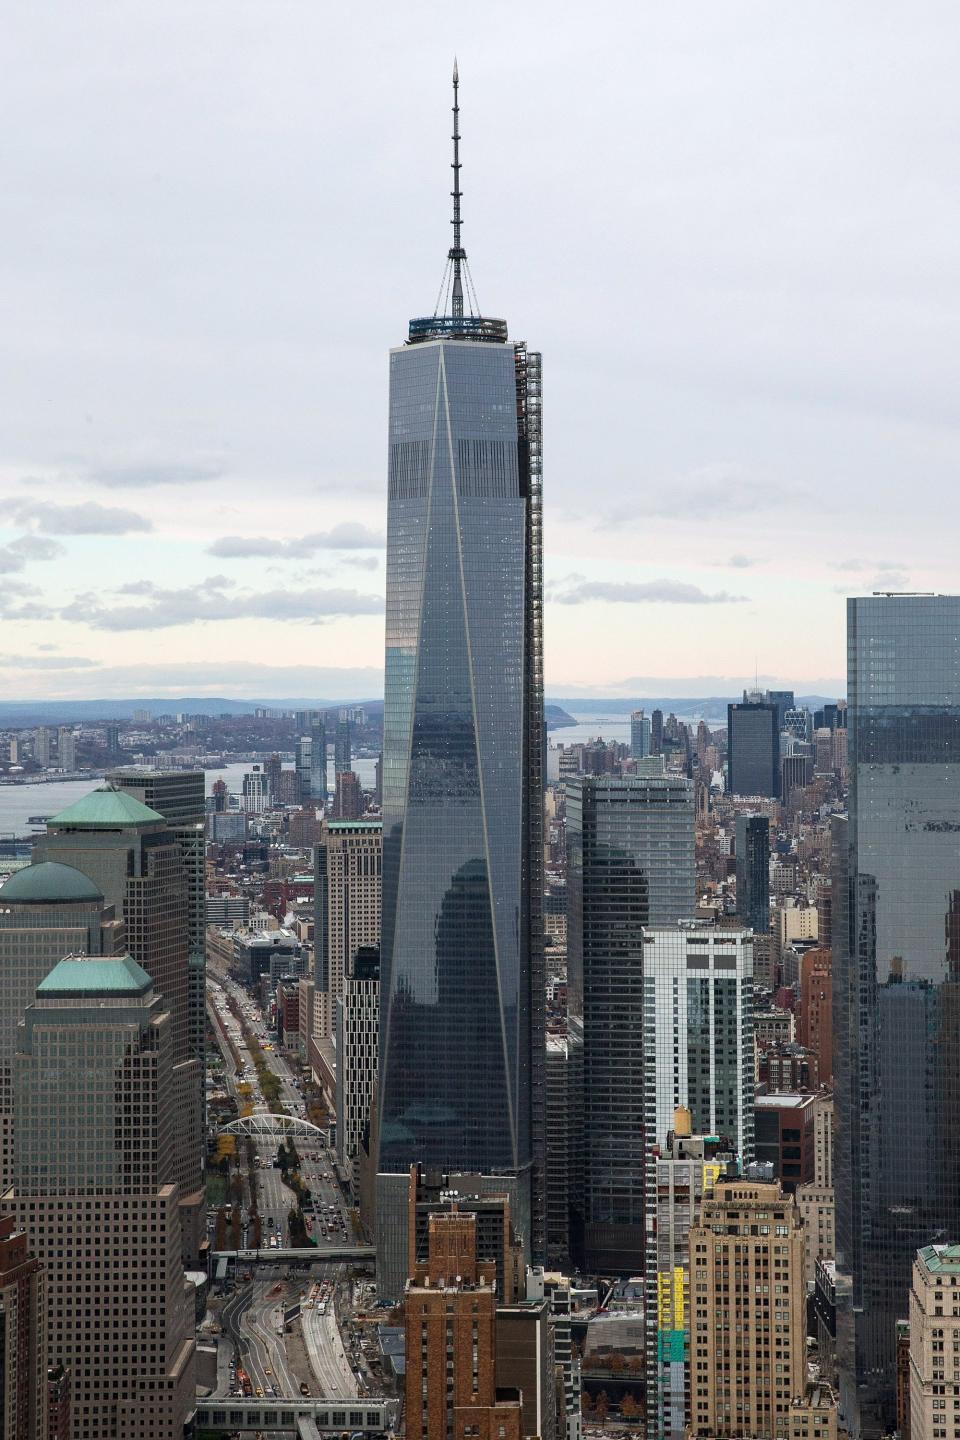 NEW YORK, NY - NOVEMBER 12:  One World Trade Center towers over lower Manhattan on November 12, 2013 in New York City. The building was deemed the tallest building in North America today; the title was previously held by Willis Tower in Chicago (previously titled Sears Tower).  (Photo by Andrew Burton/Getty Images)